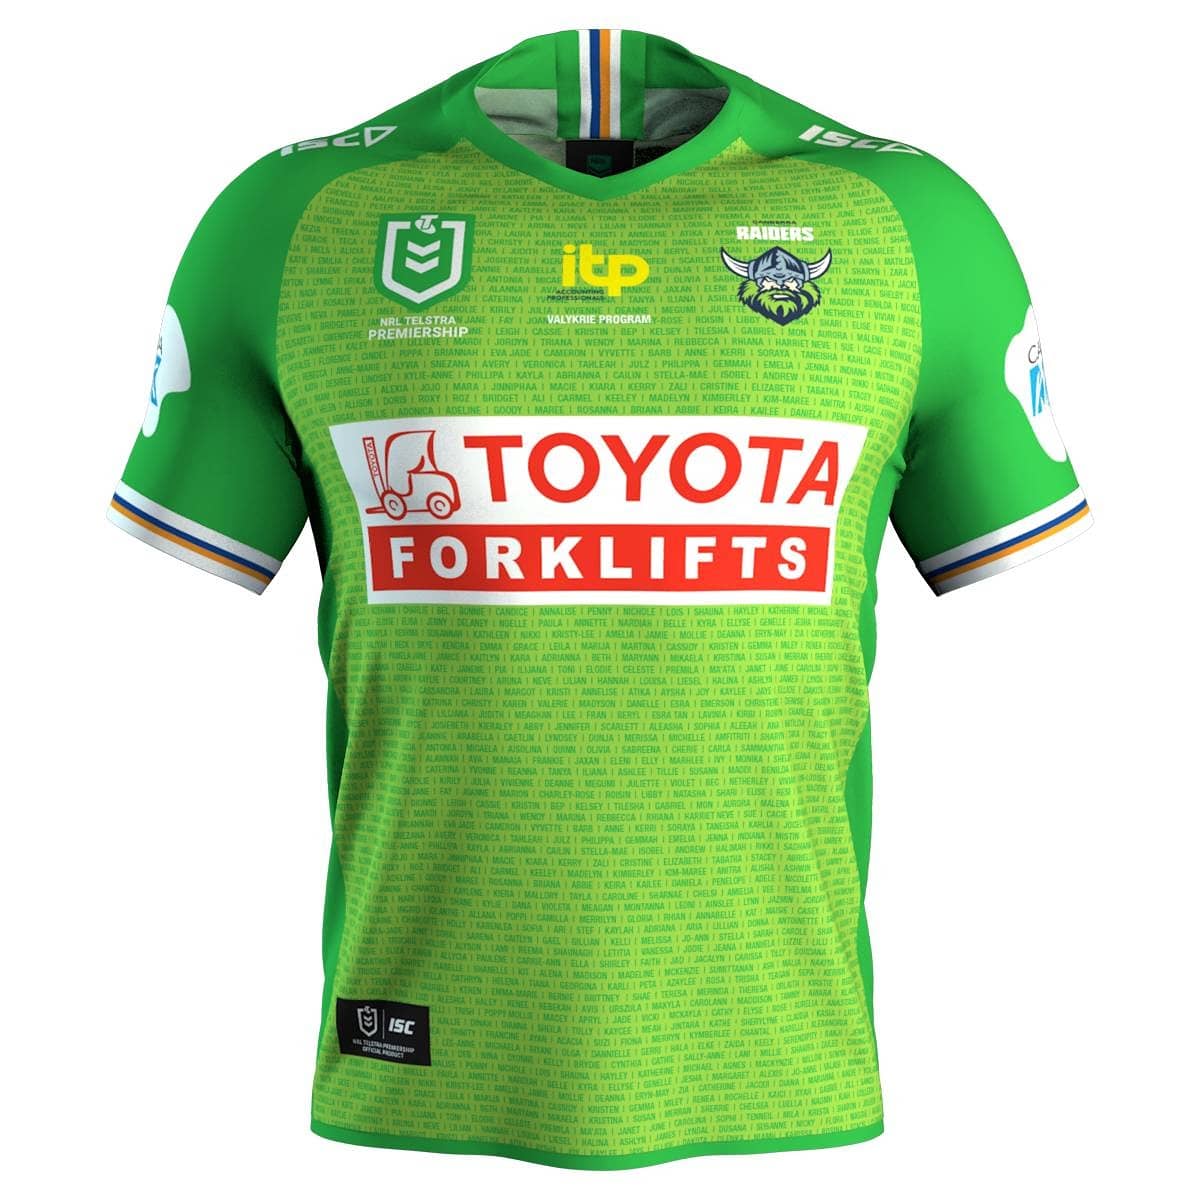 Canberra Raiders Jersey Nerd on Twitter: "Loving the new @RaidersCanberra  @ISCSport Women In League jersey for 2021! The Valkyrie logo on the back is  a great addition along with the names through